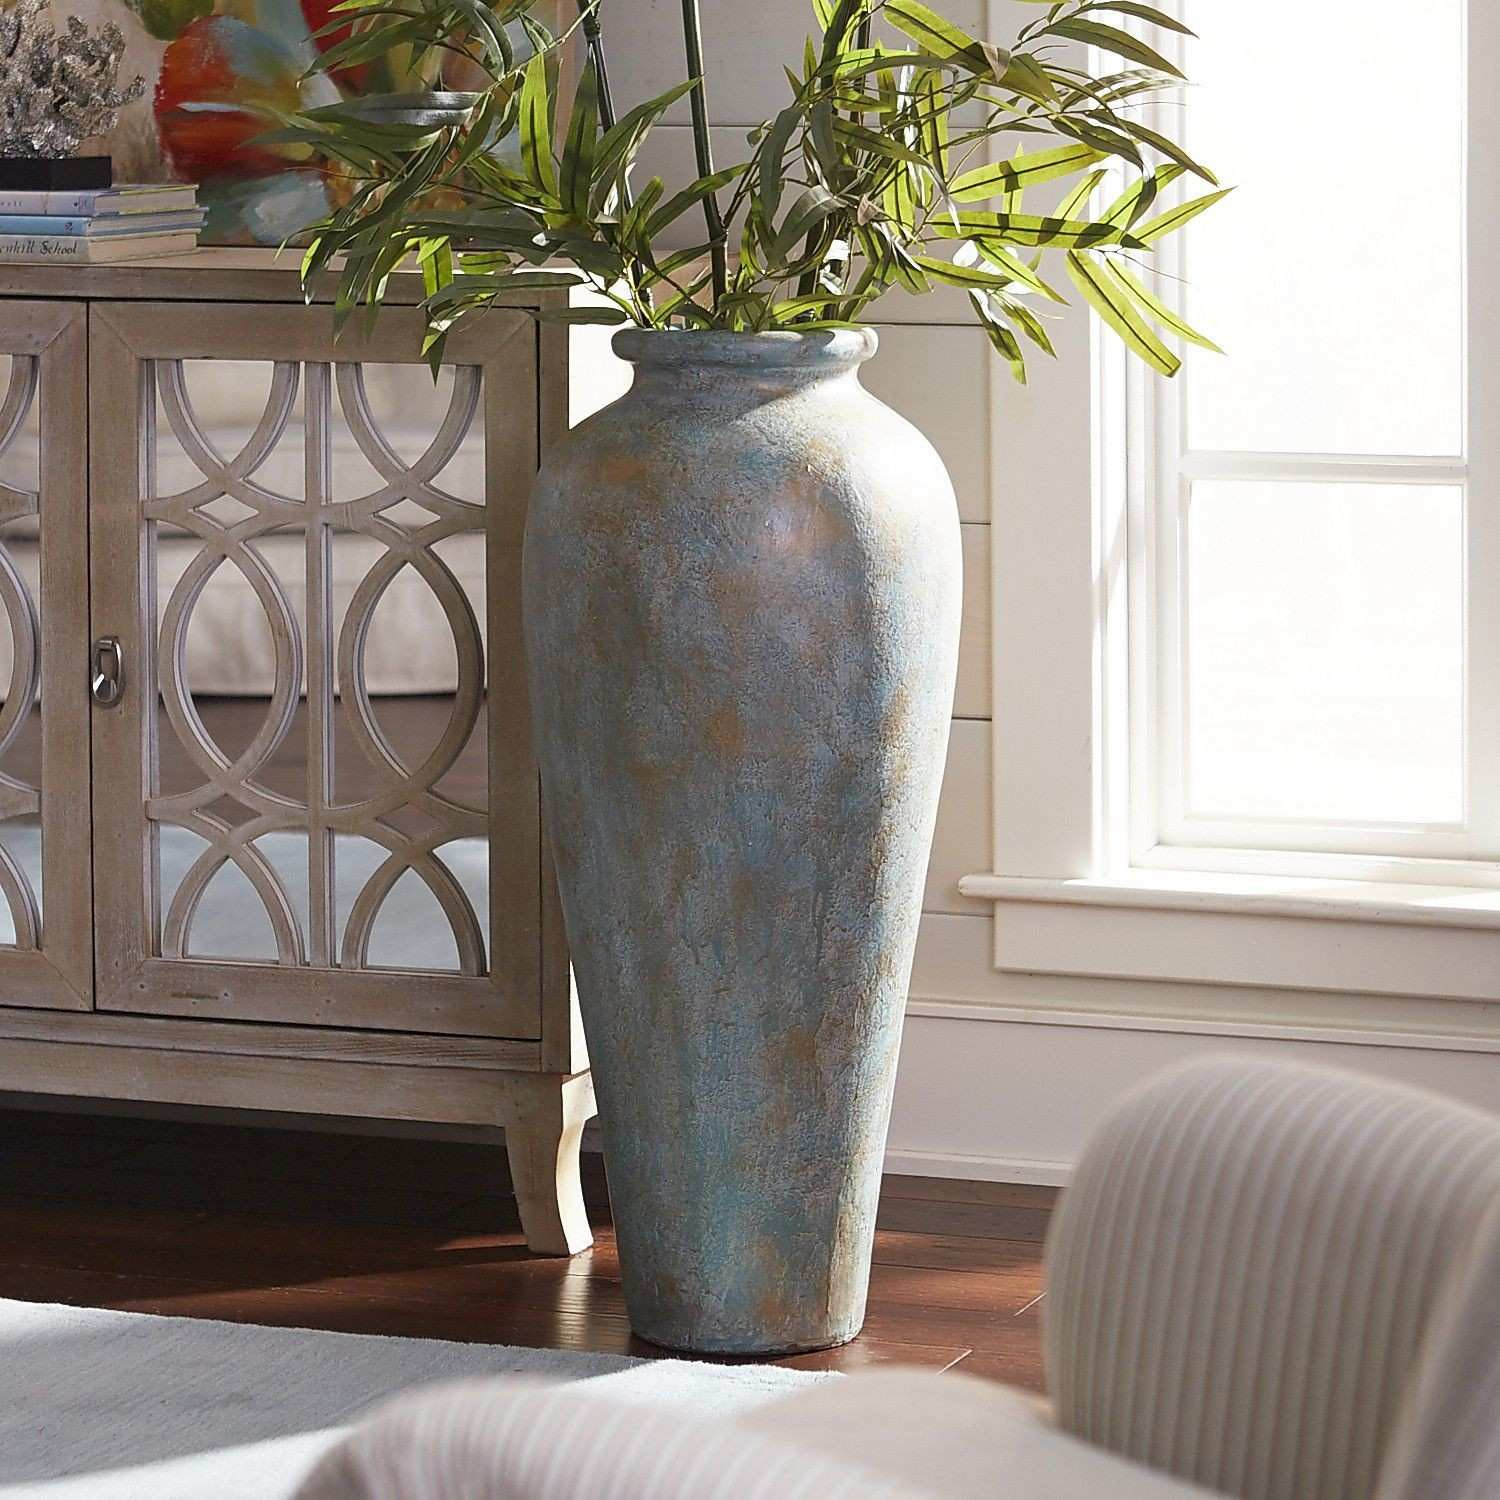 14 attractive Large Wooden Vase 2024 free download large wooden vase of decorating ideas for vases elegant il fullxfull nny9h vases flower with regard to decorating ideas for vases best of blue green patina urn floor vase of decorating ideas